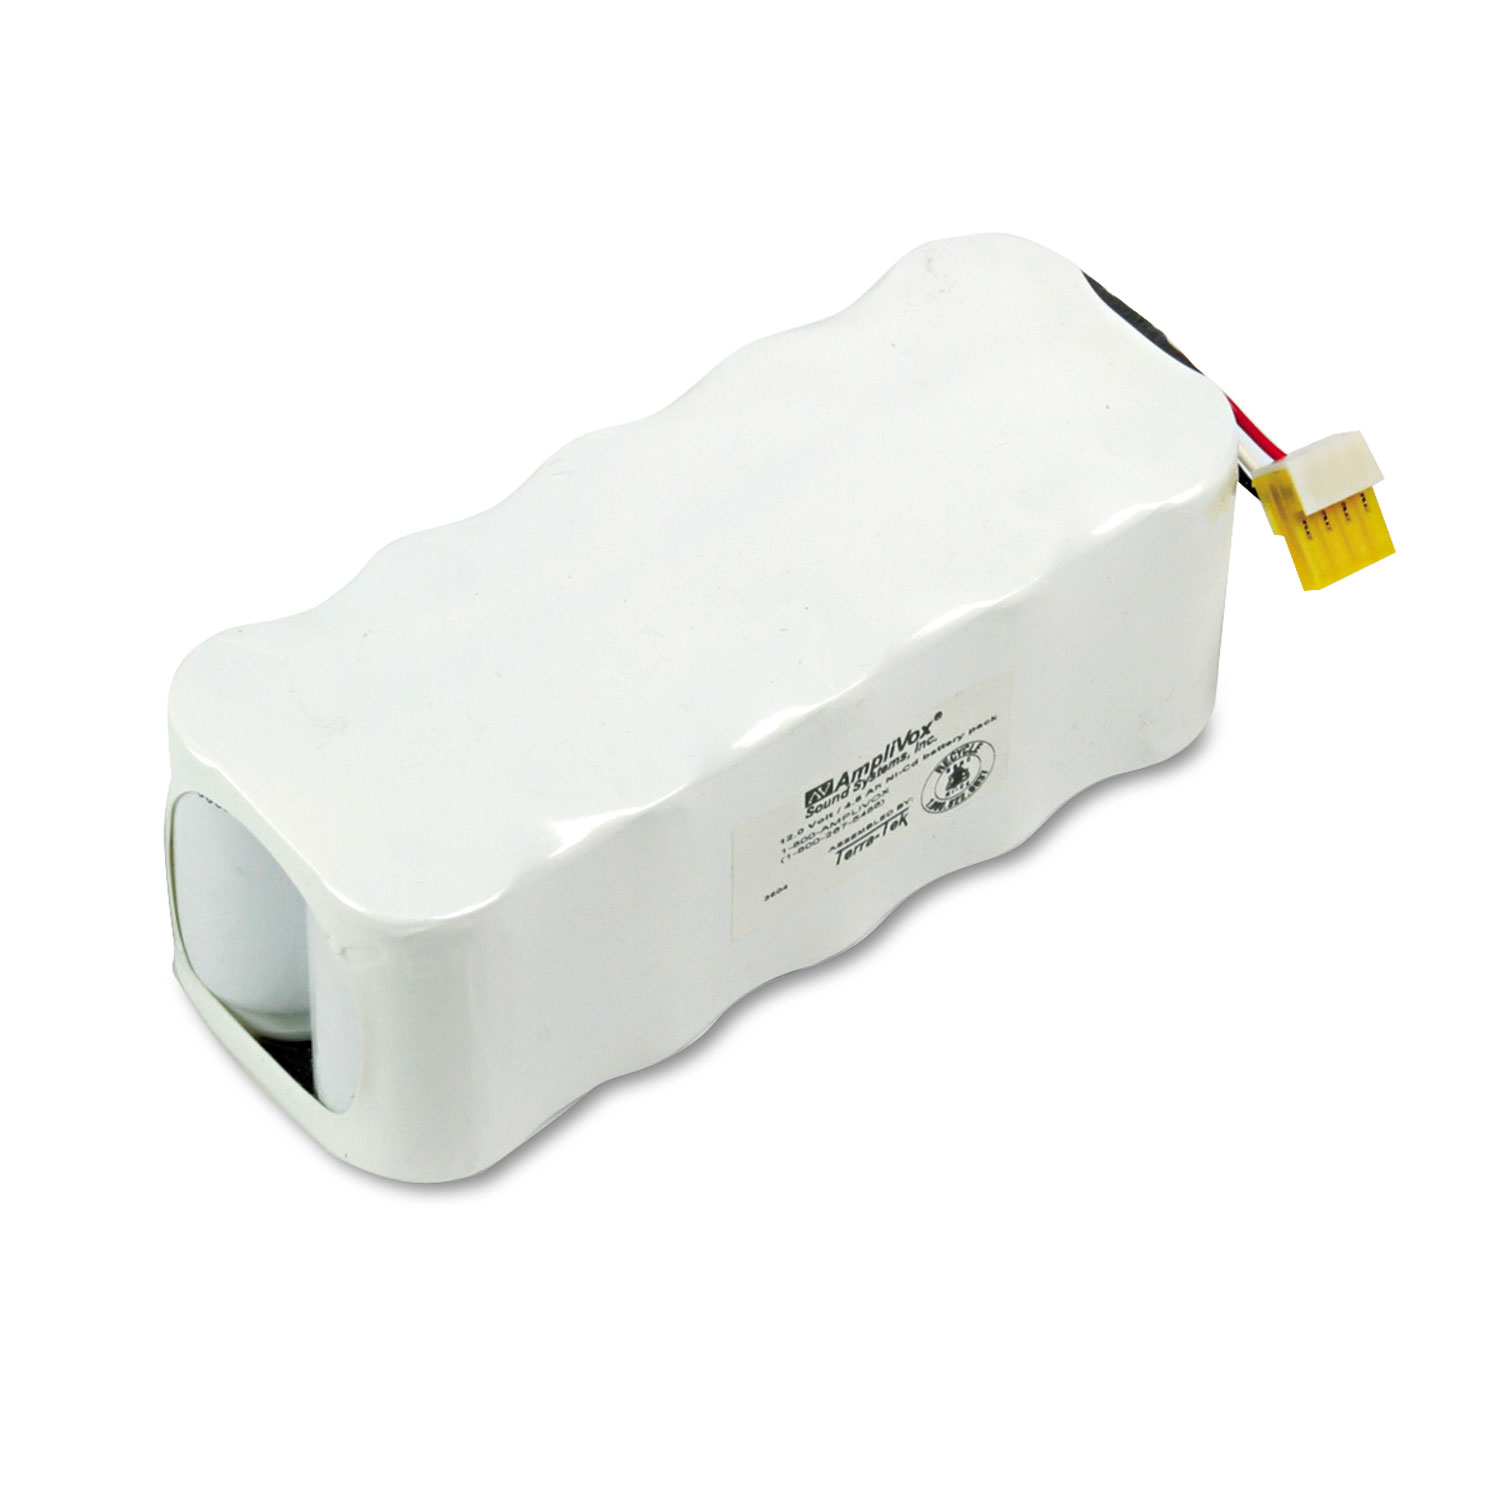  AmpliVox S1465 Rechargeable NiCad Battery Pack, Requires AC Adapter/Battery Recharger (APLS1465) 